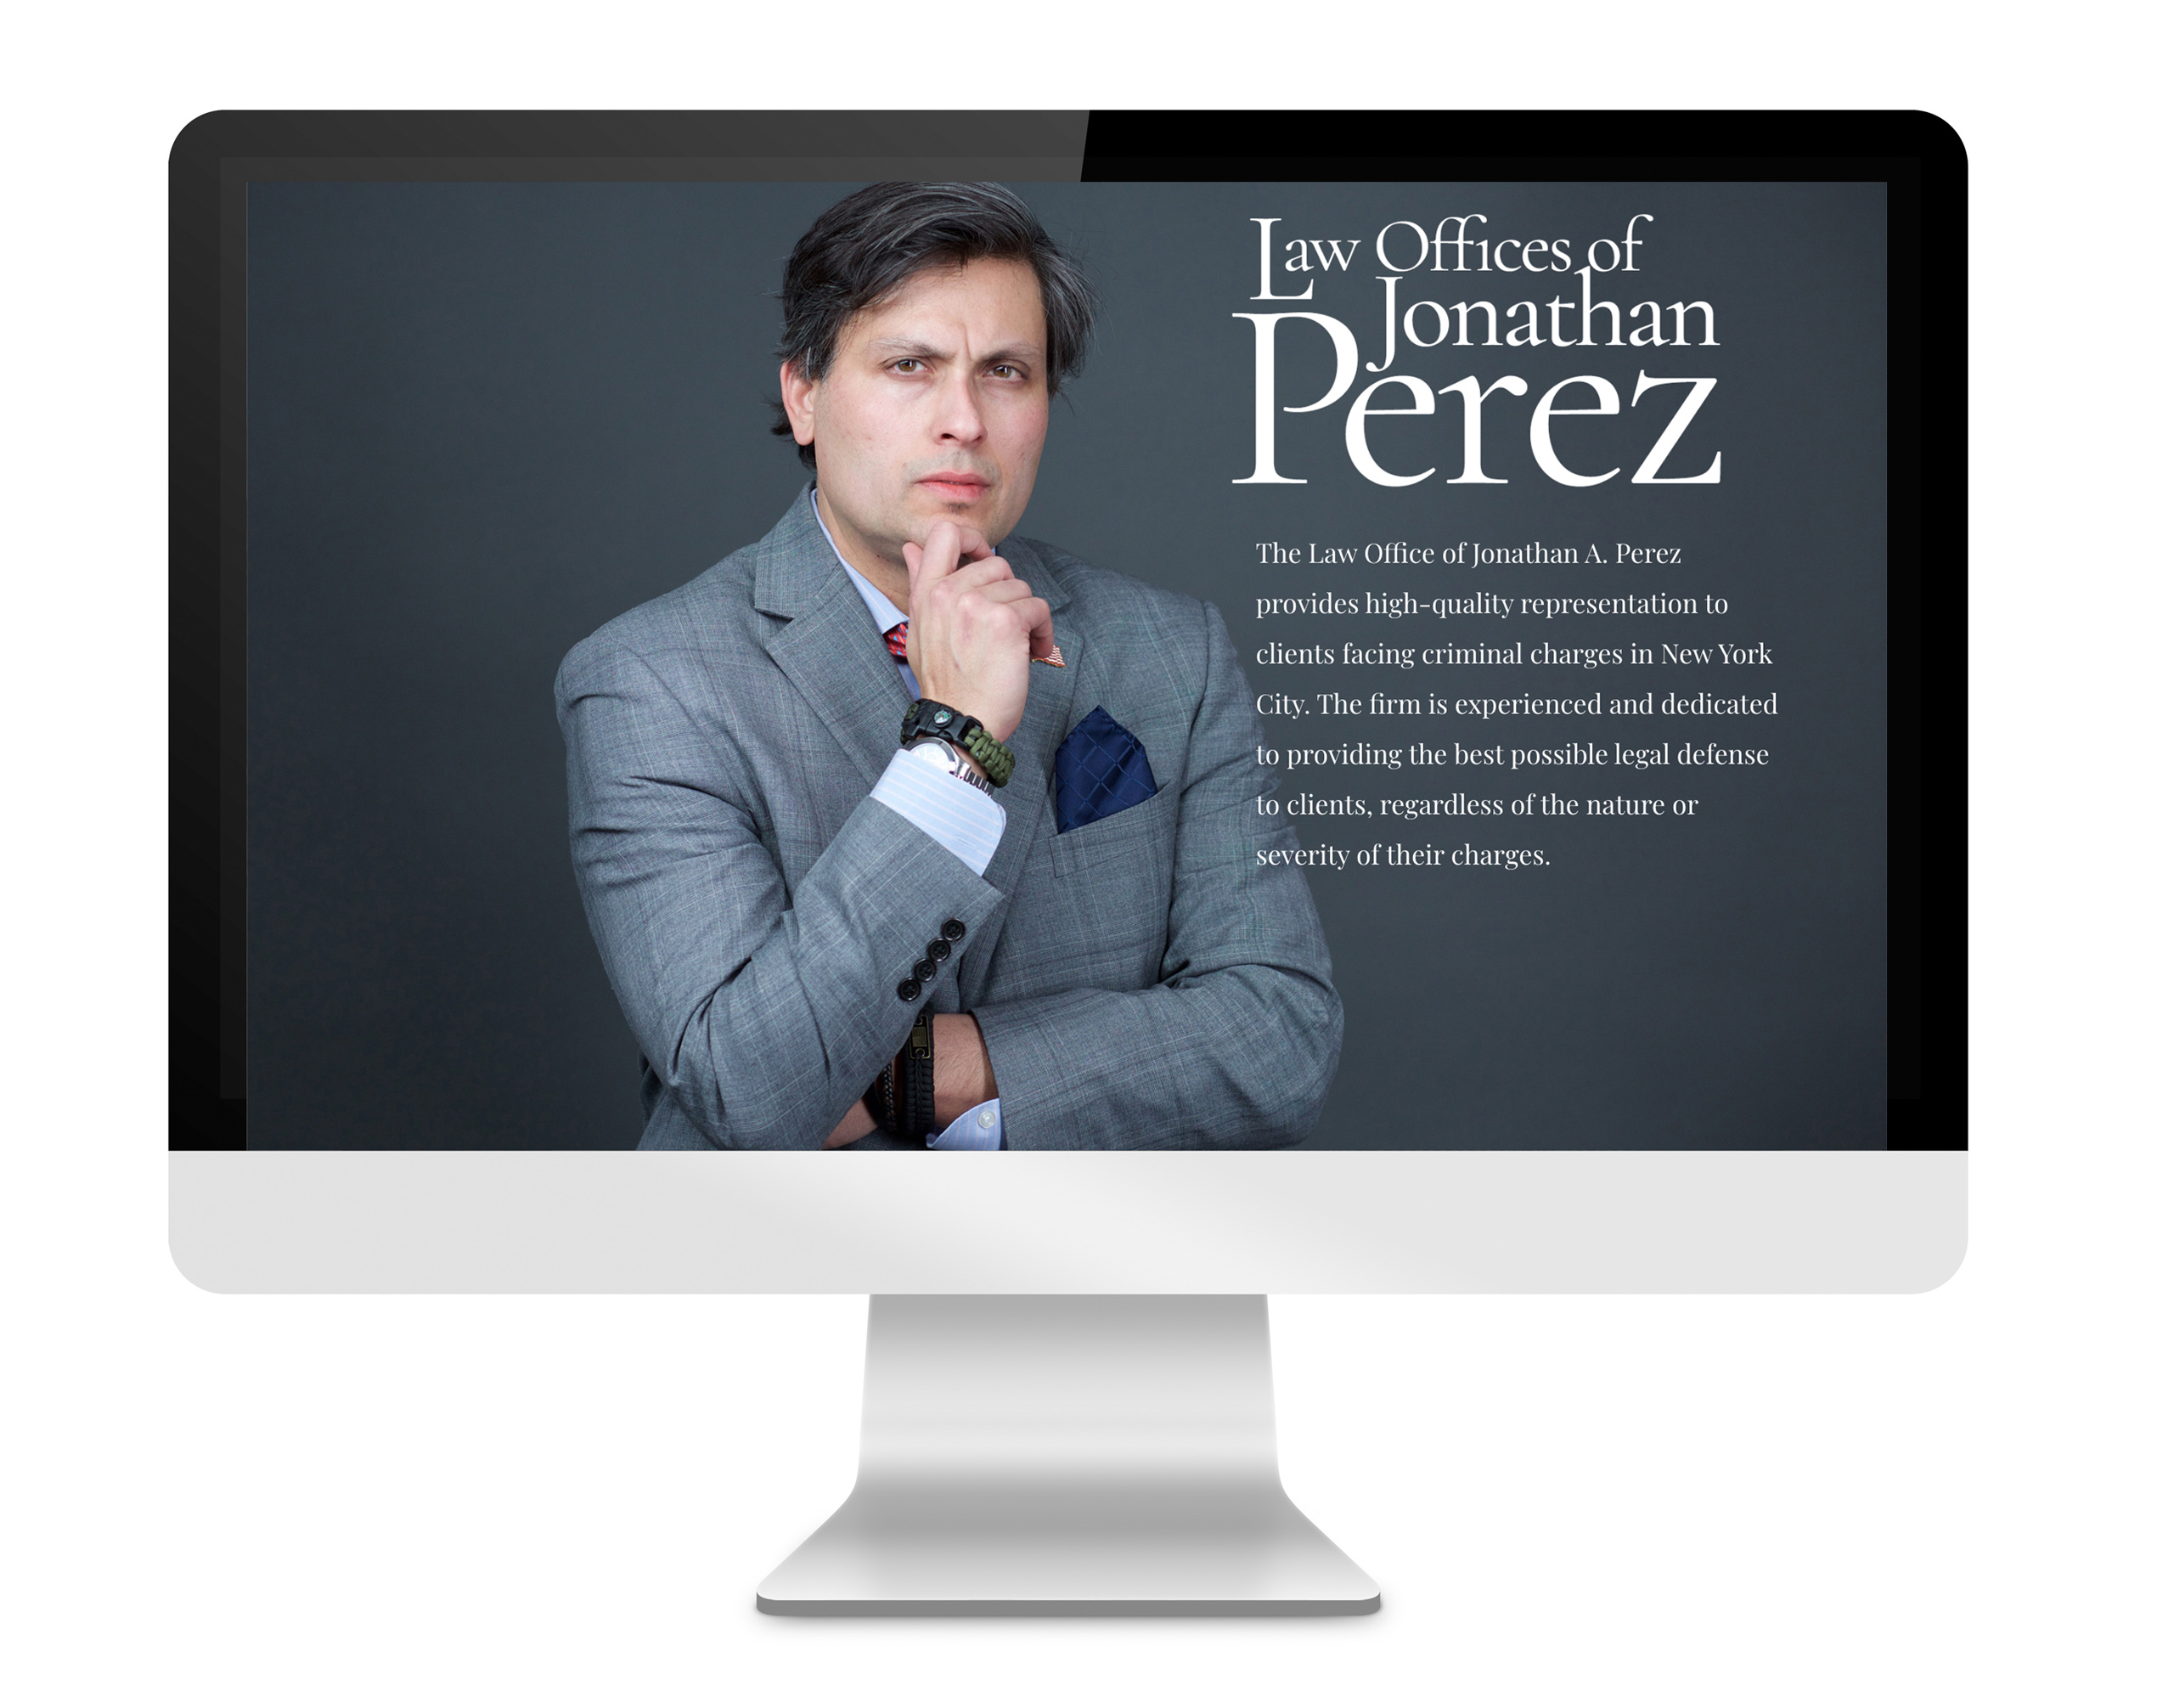 Law Offices of Jonathan Perez website, designed by DLS Design